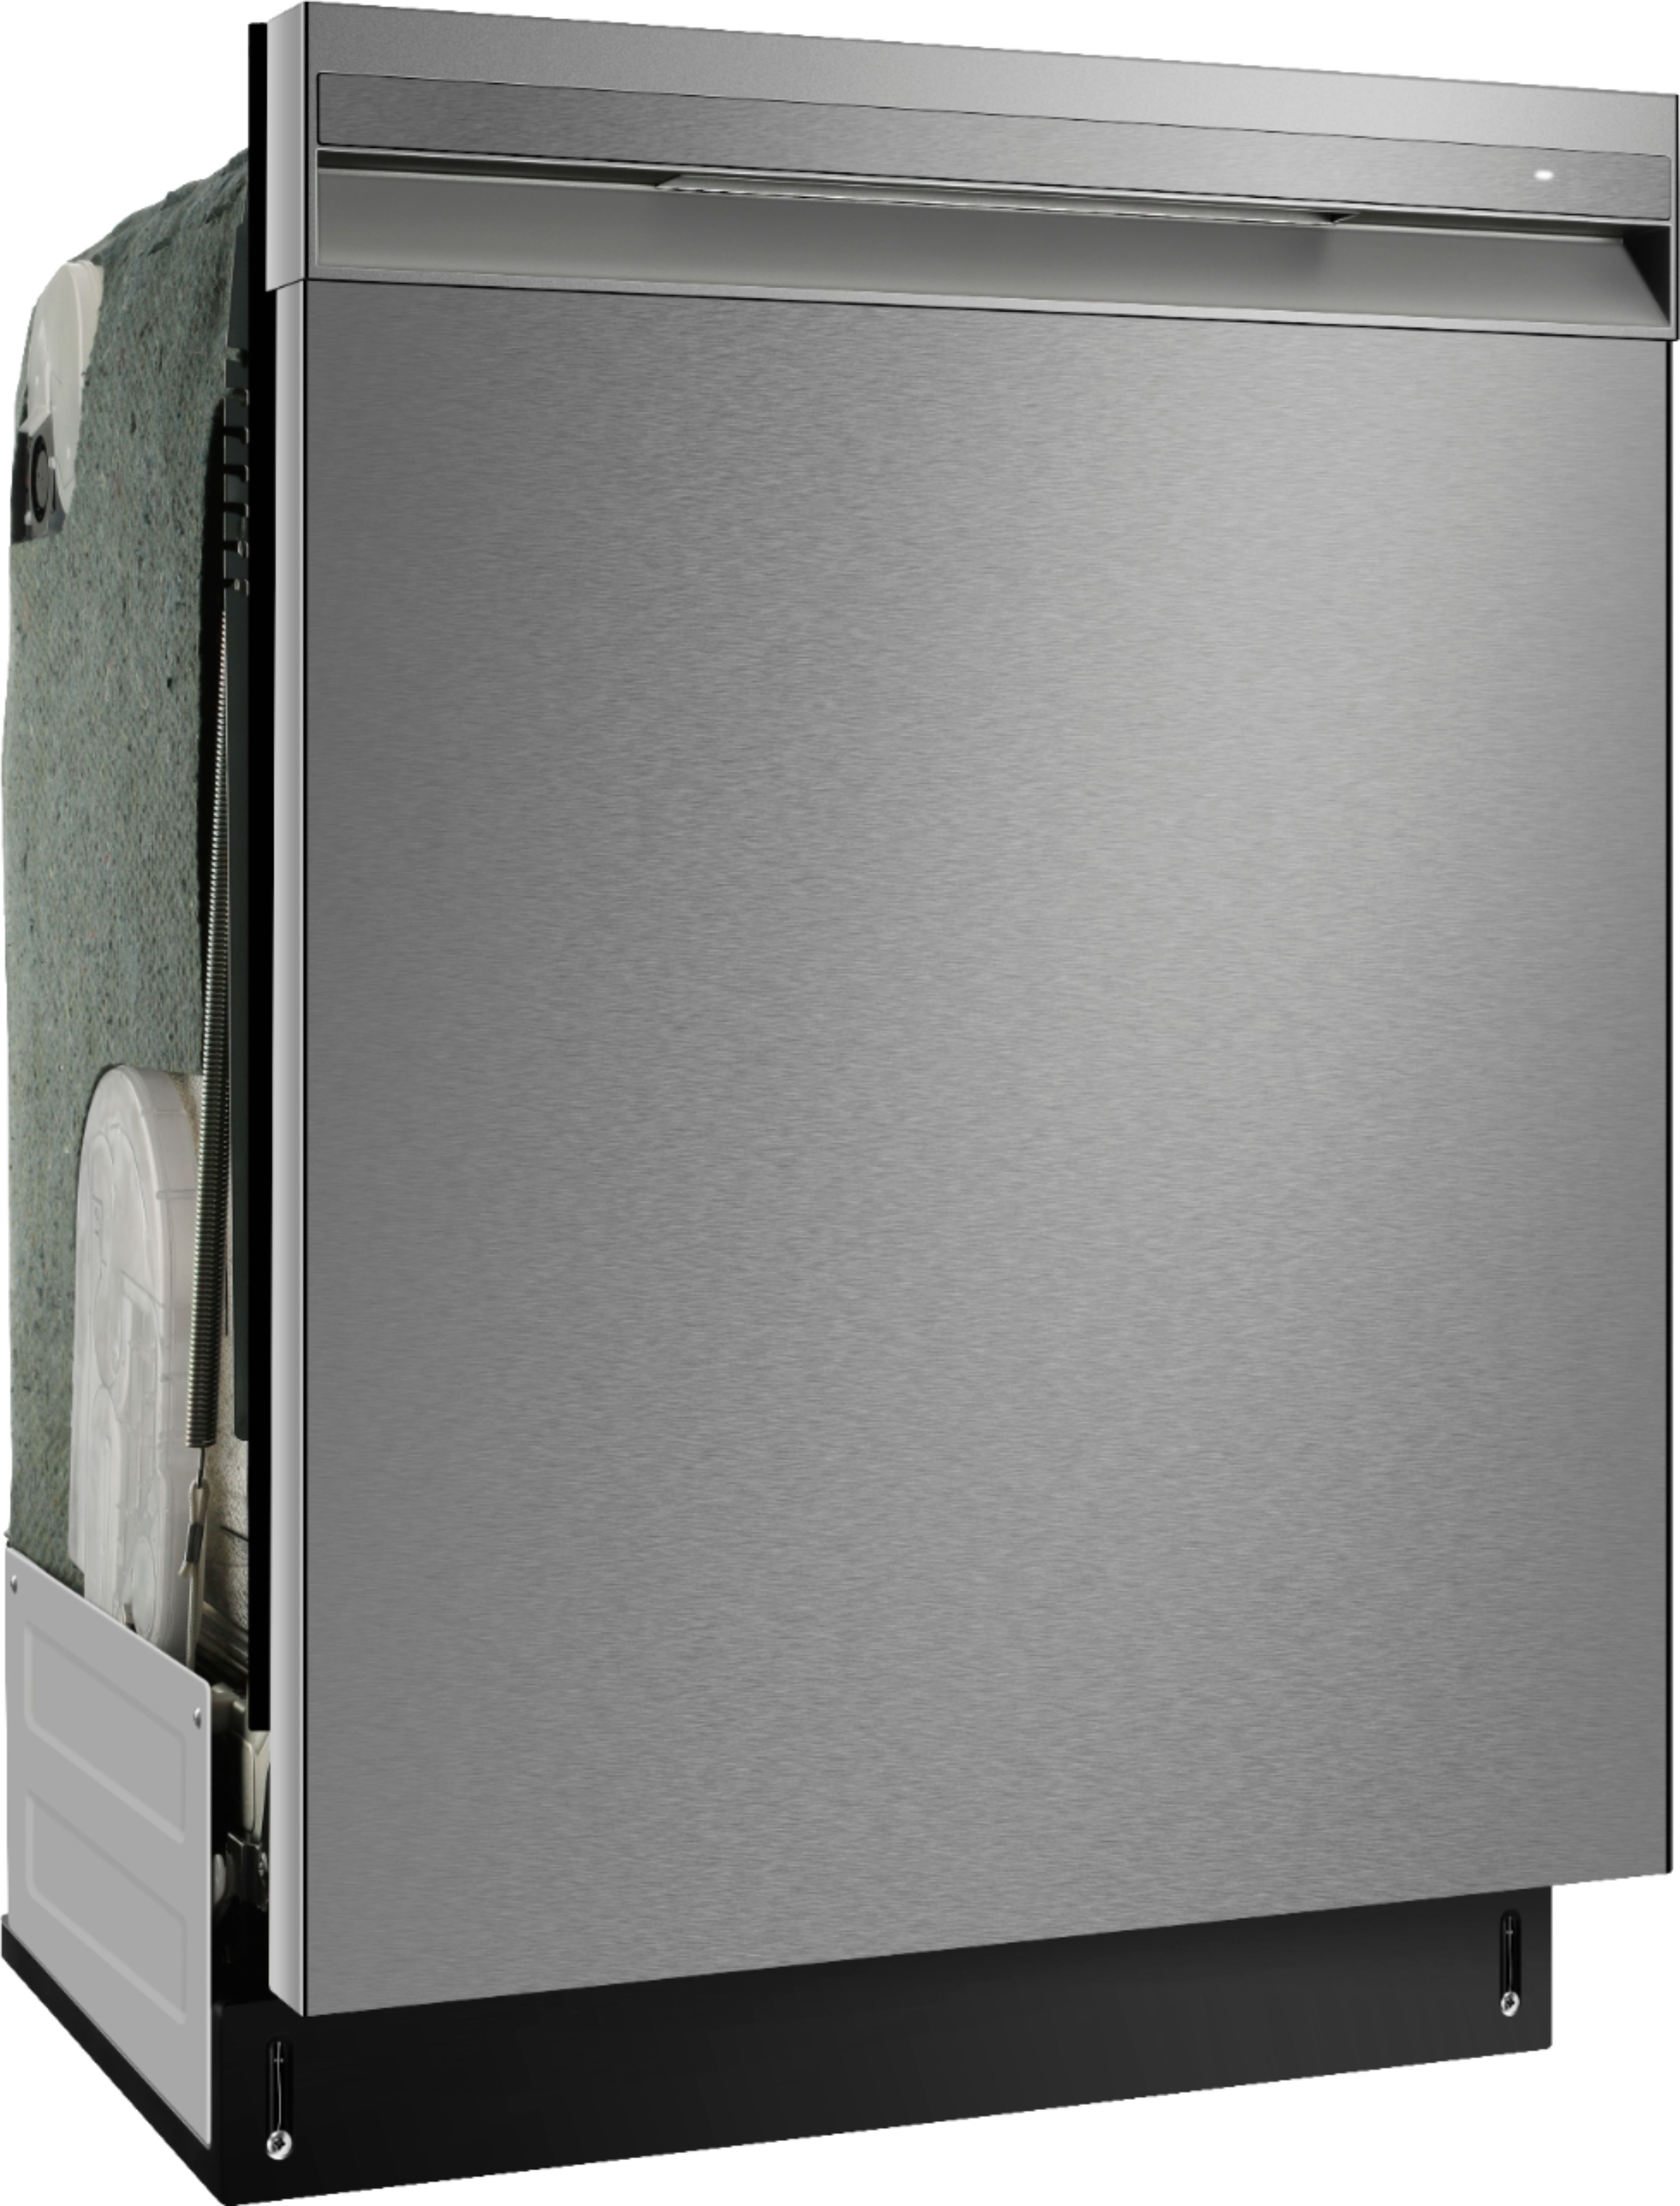 Angle View: LG - 24" Top Control Built-In Dishwasher with TrueSteam and Third Rack - Black stainless steel